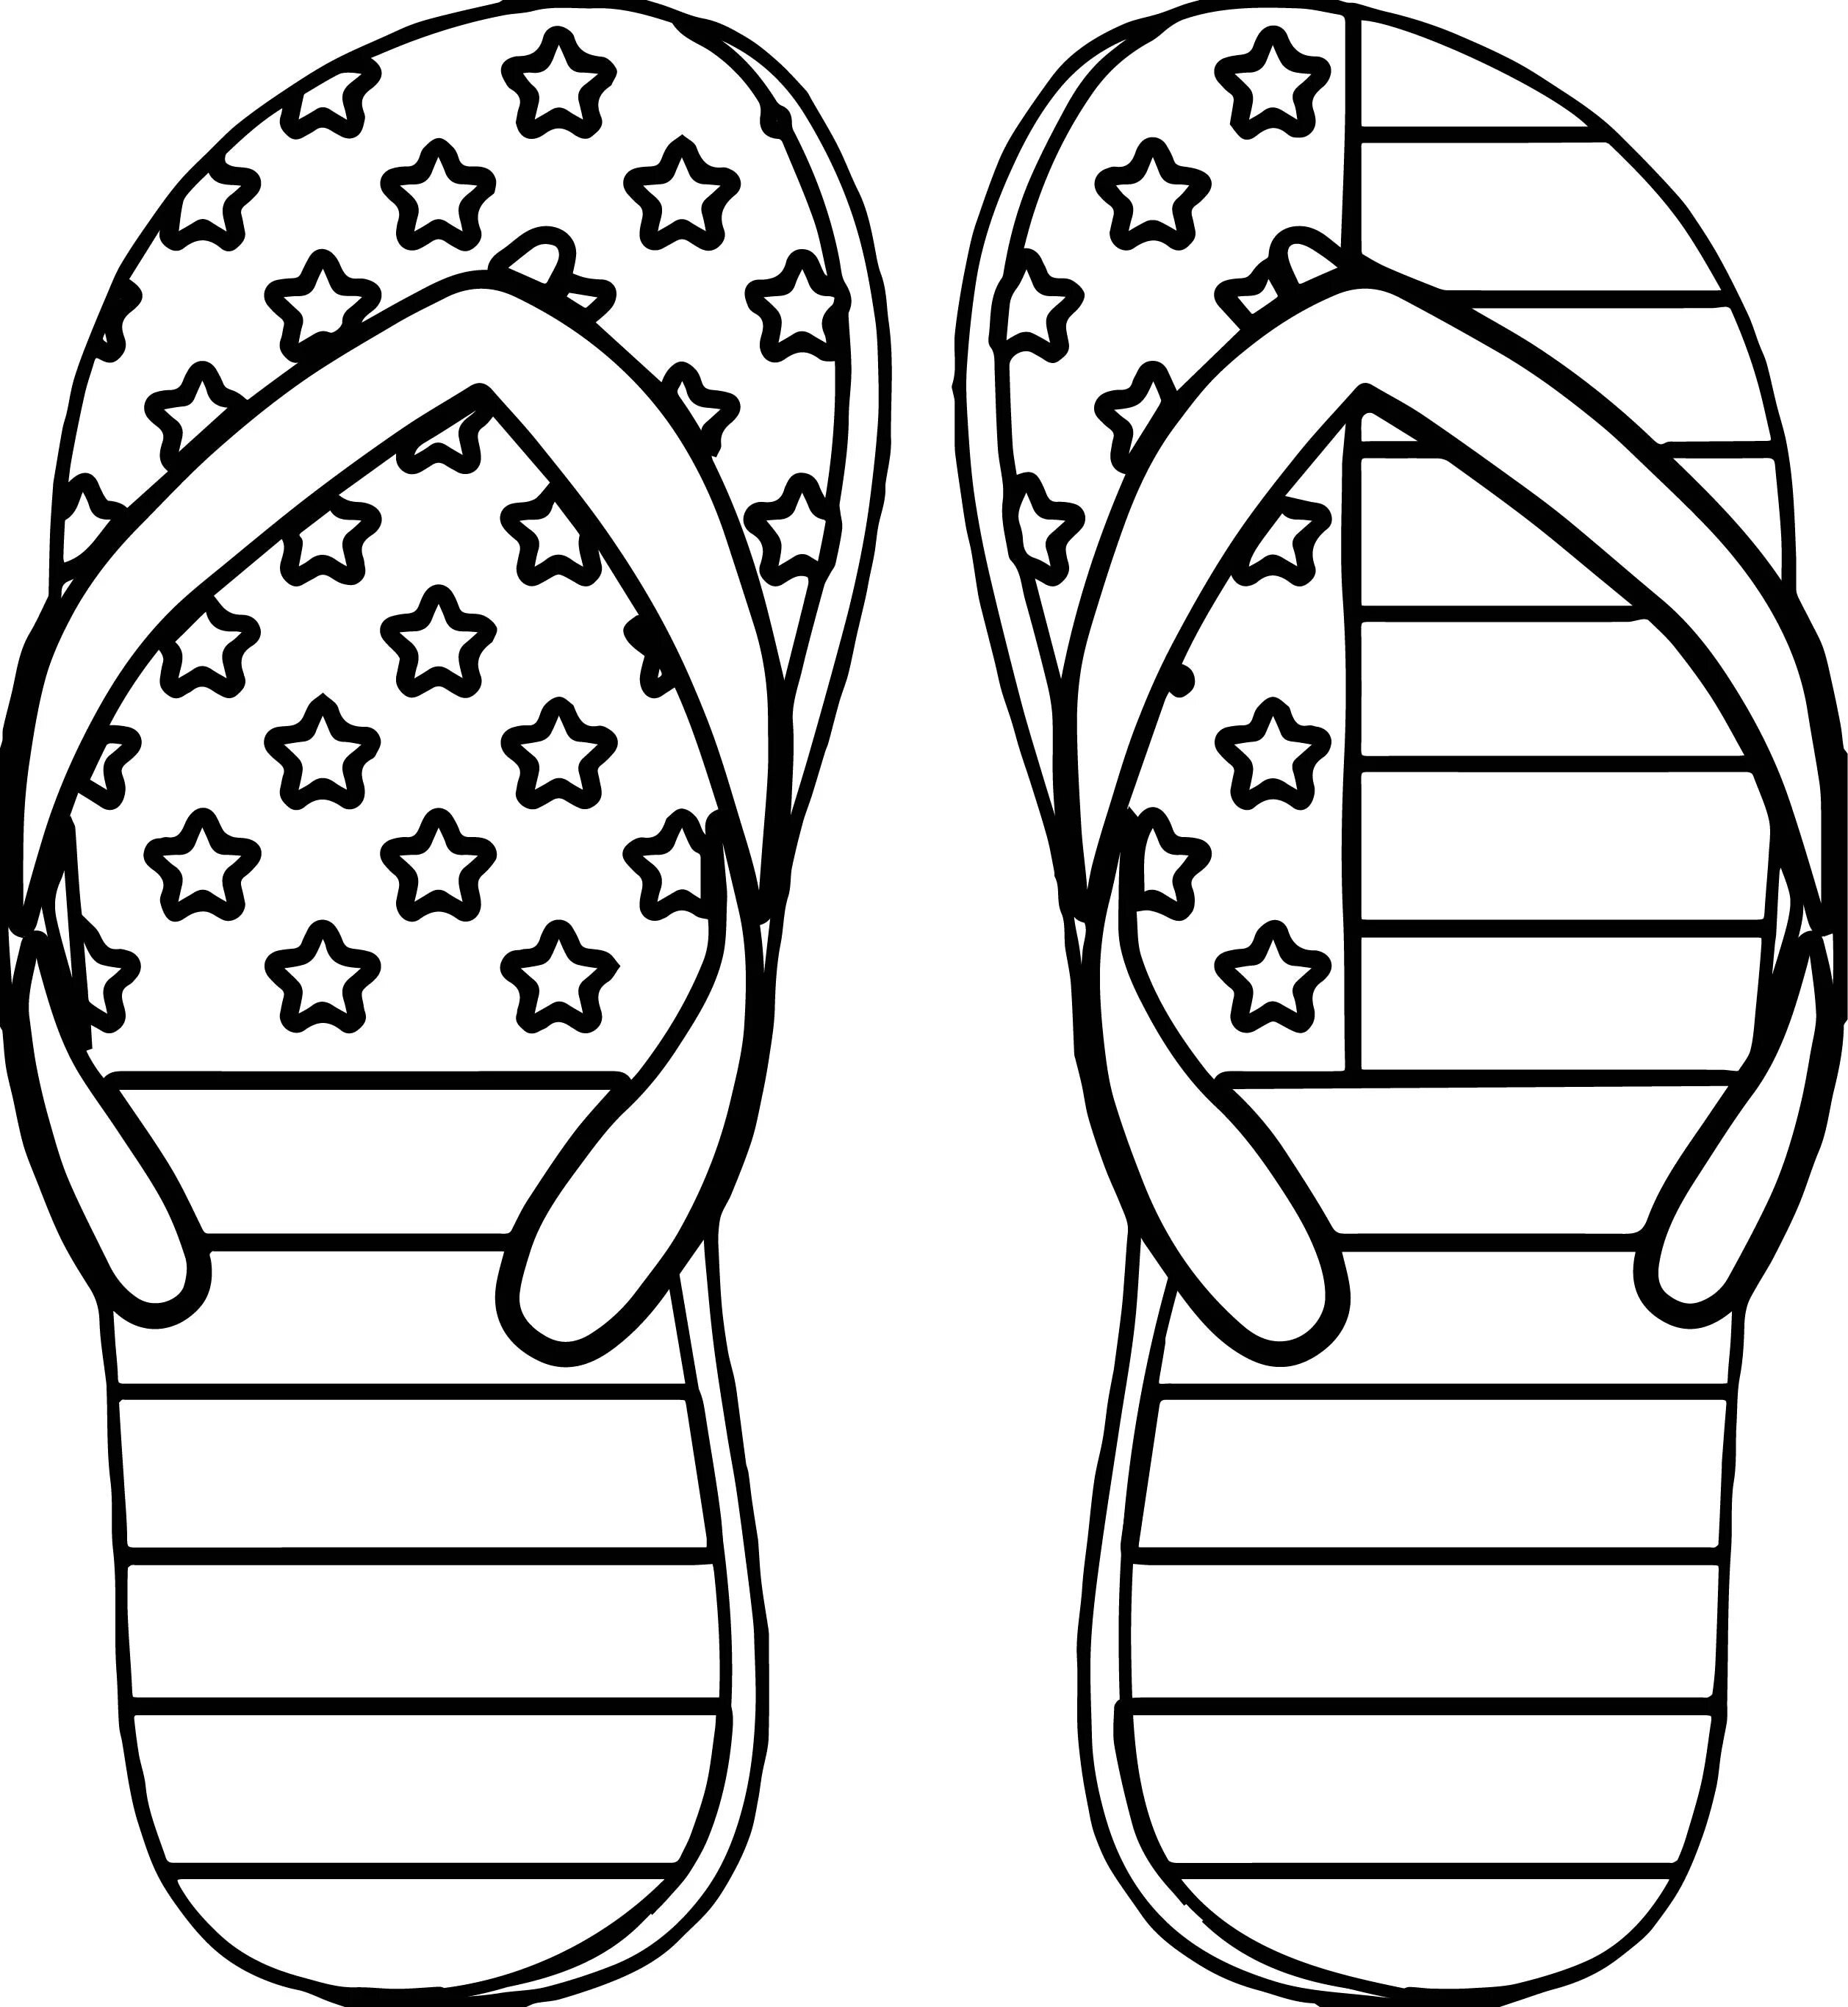 Wonderful slippers coloring for kids